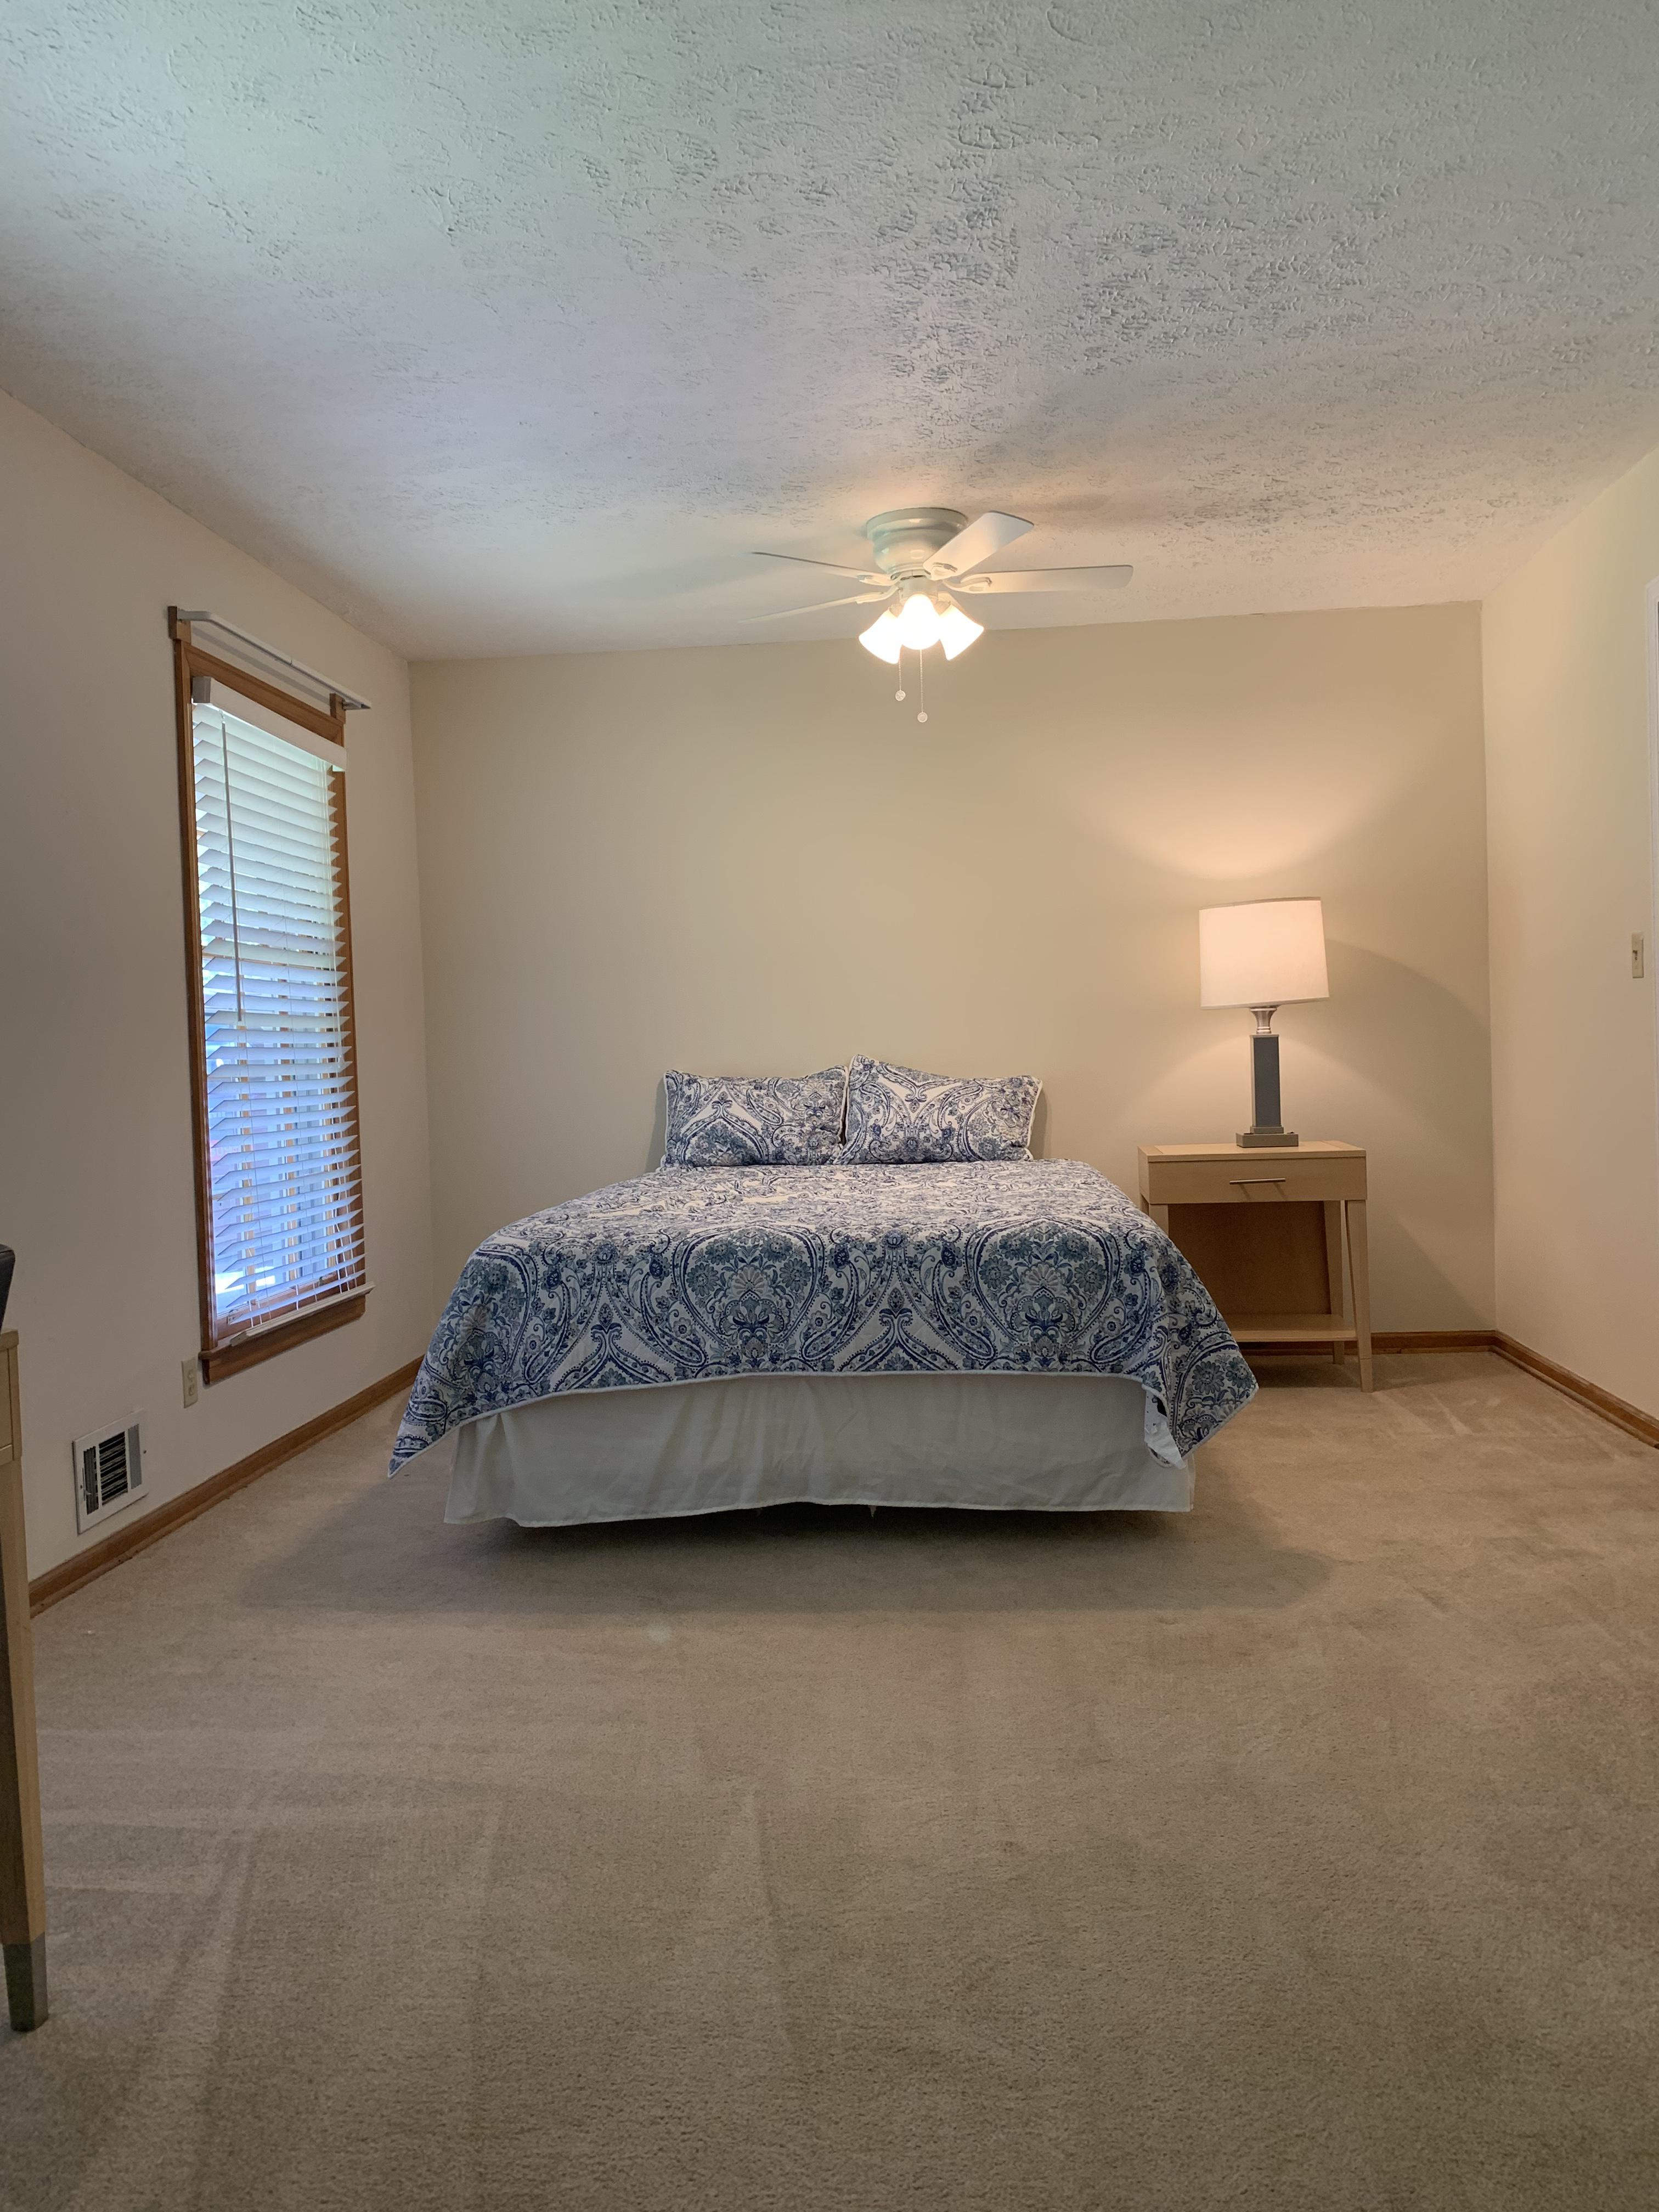 Ceiling fan and light above the bed for your comfort